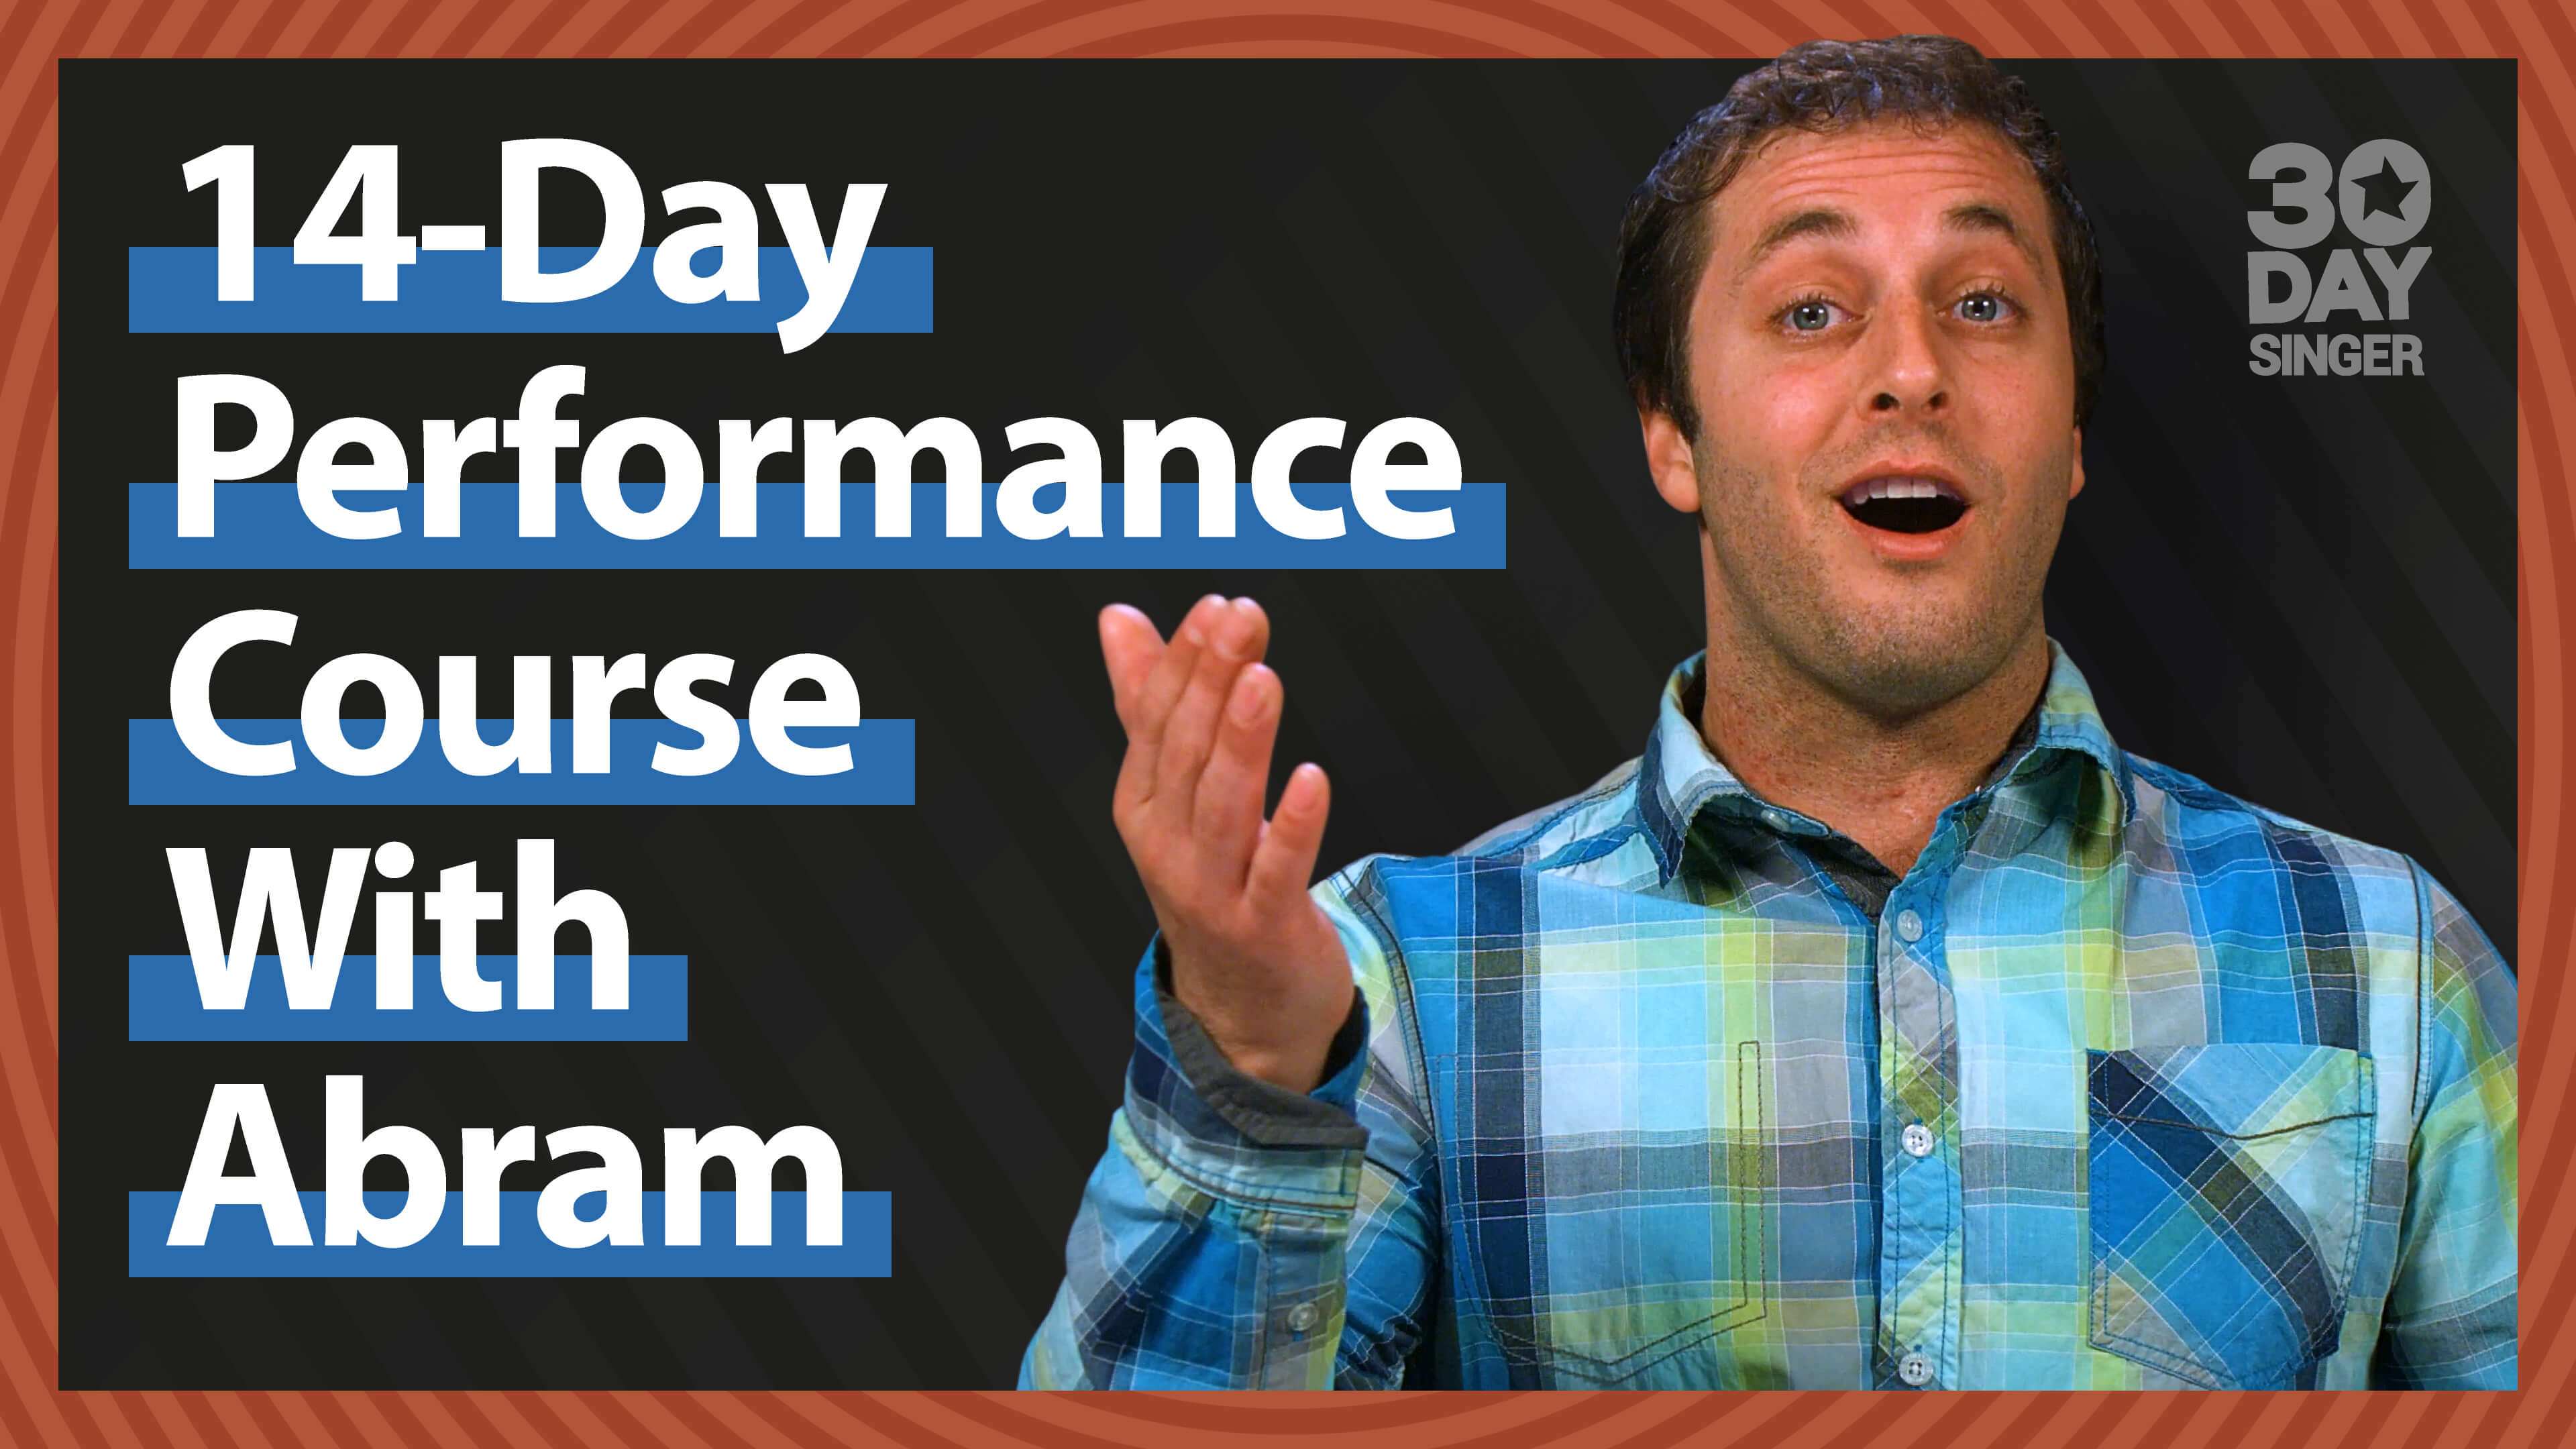 14-Day Performance Course With Abram